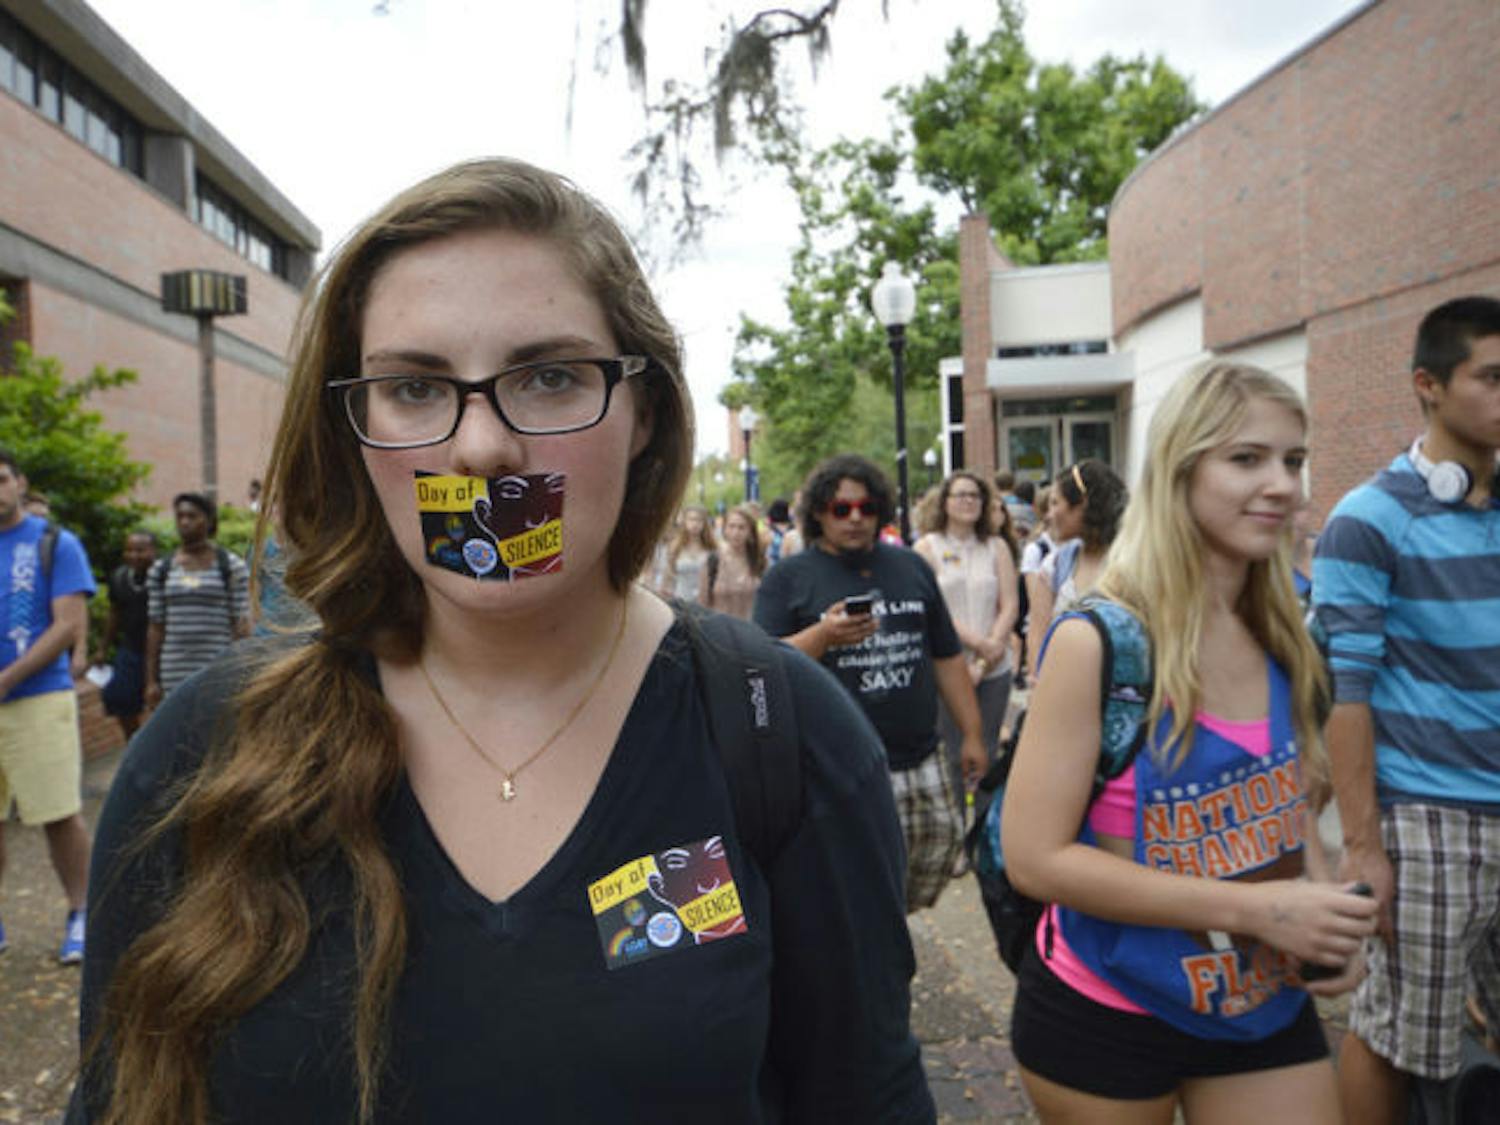 Kerry Stern, a 21-year-old UF economics major, stands in silence with her peers as part of the Day of Silence in support of LGBTQ students on Turlington Plaza on Friday afternoon.